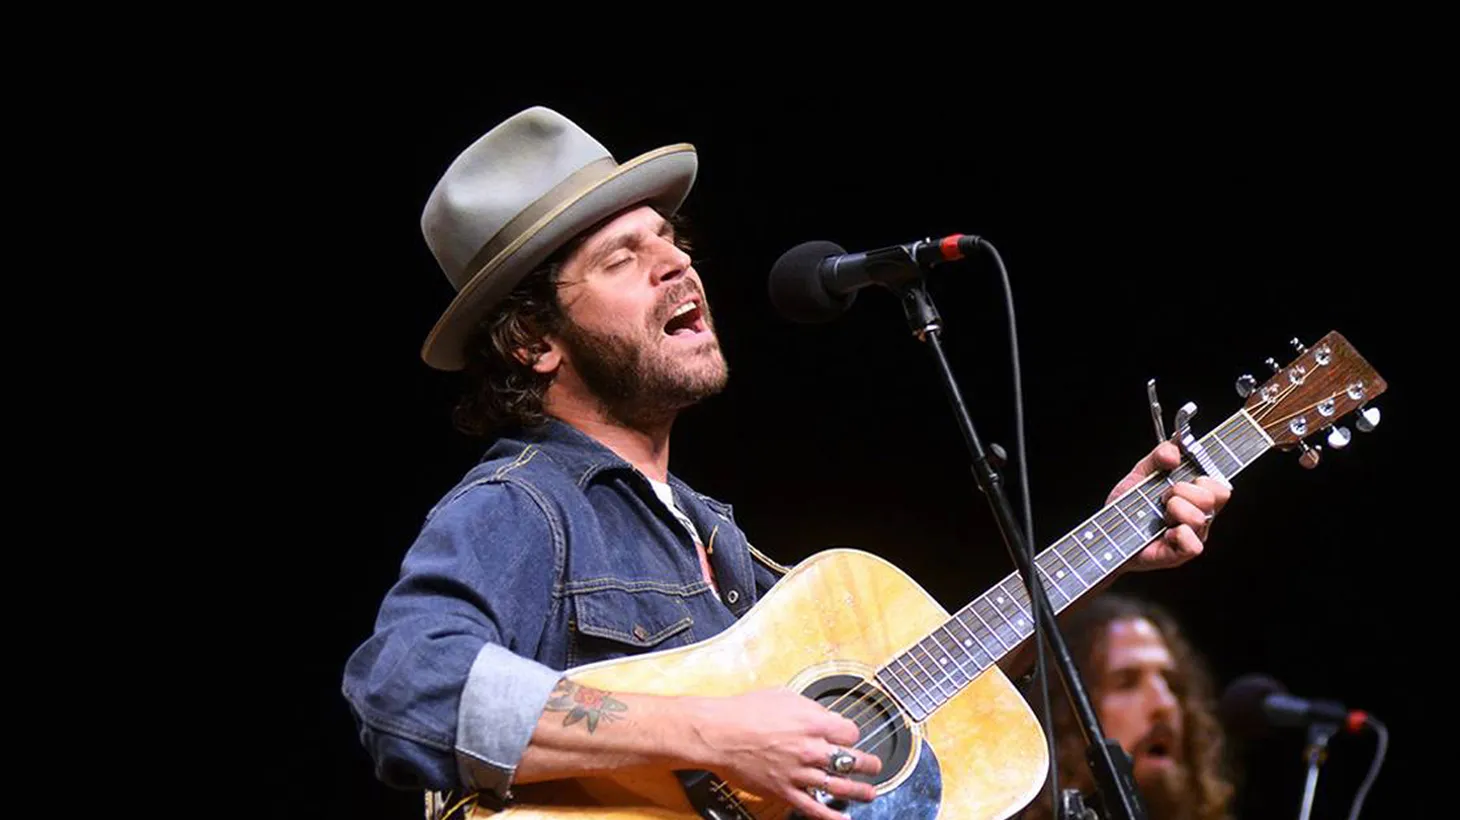 With a ragged voice and raucous songs, the rollicking rock of Langhorne Slim has been wowing audiences across the country for many years.